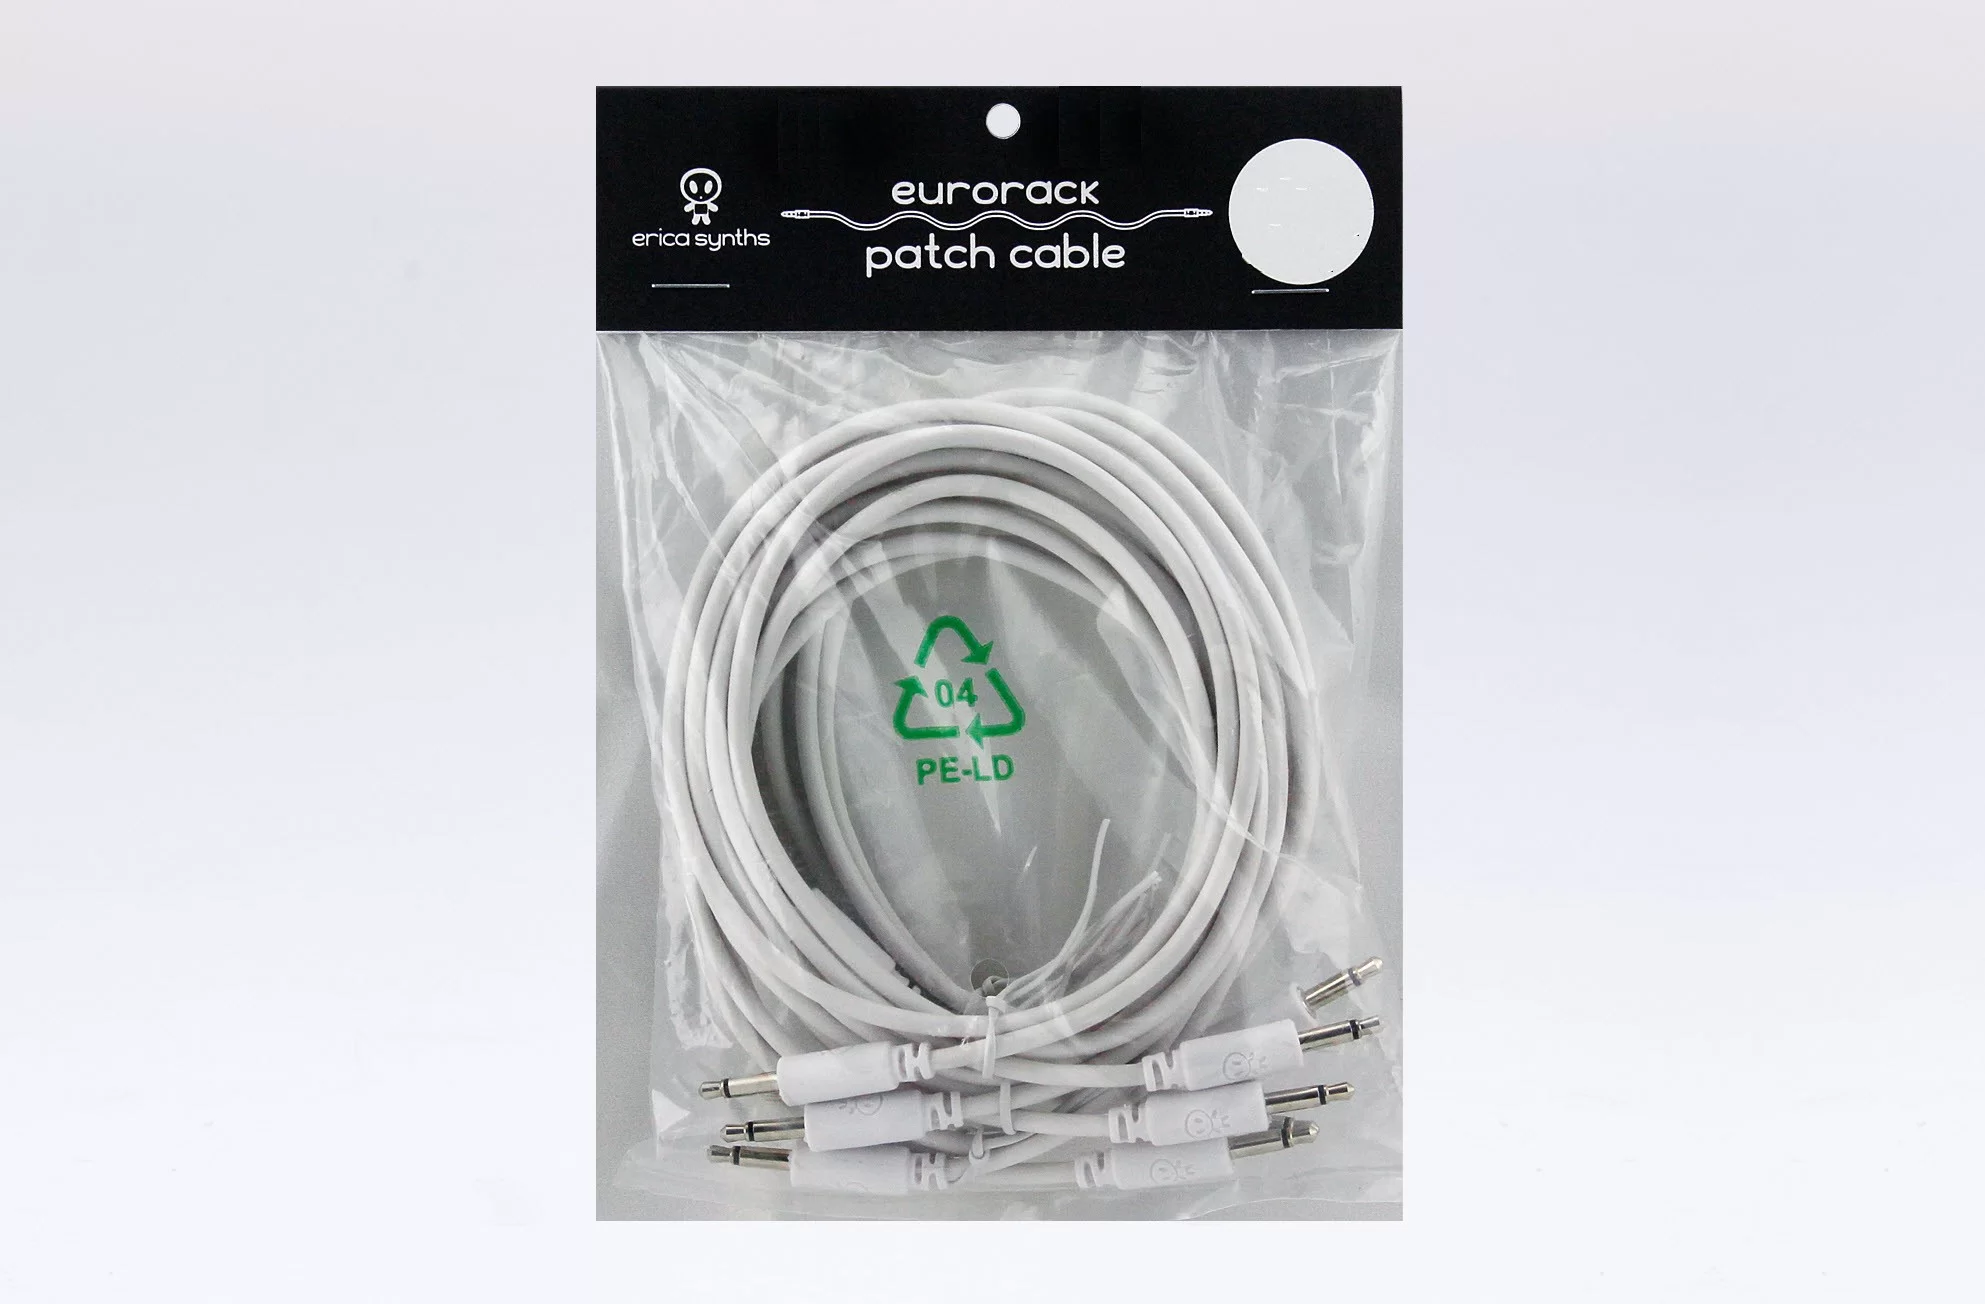 Erica Synths Eurorack patch cables 30cm (5 stk) - Rød